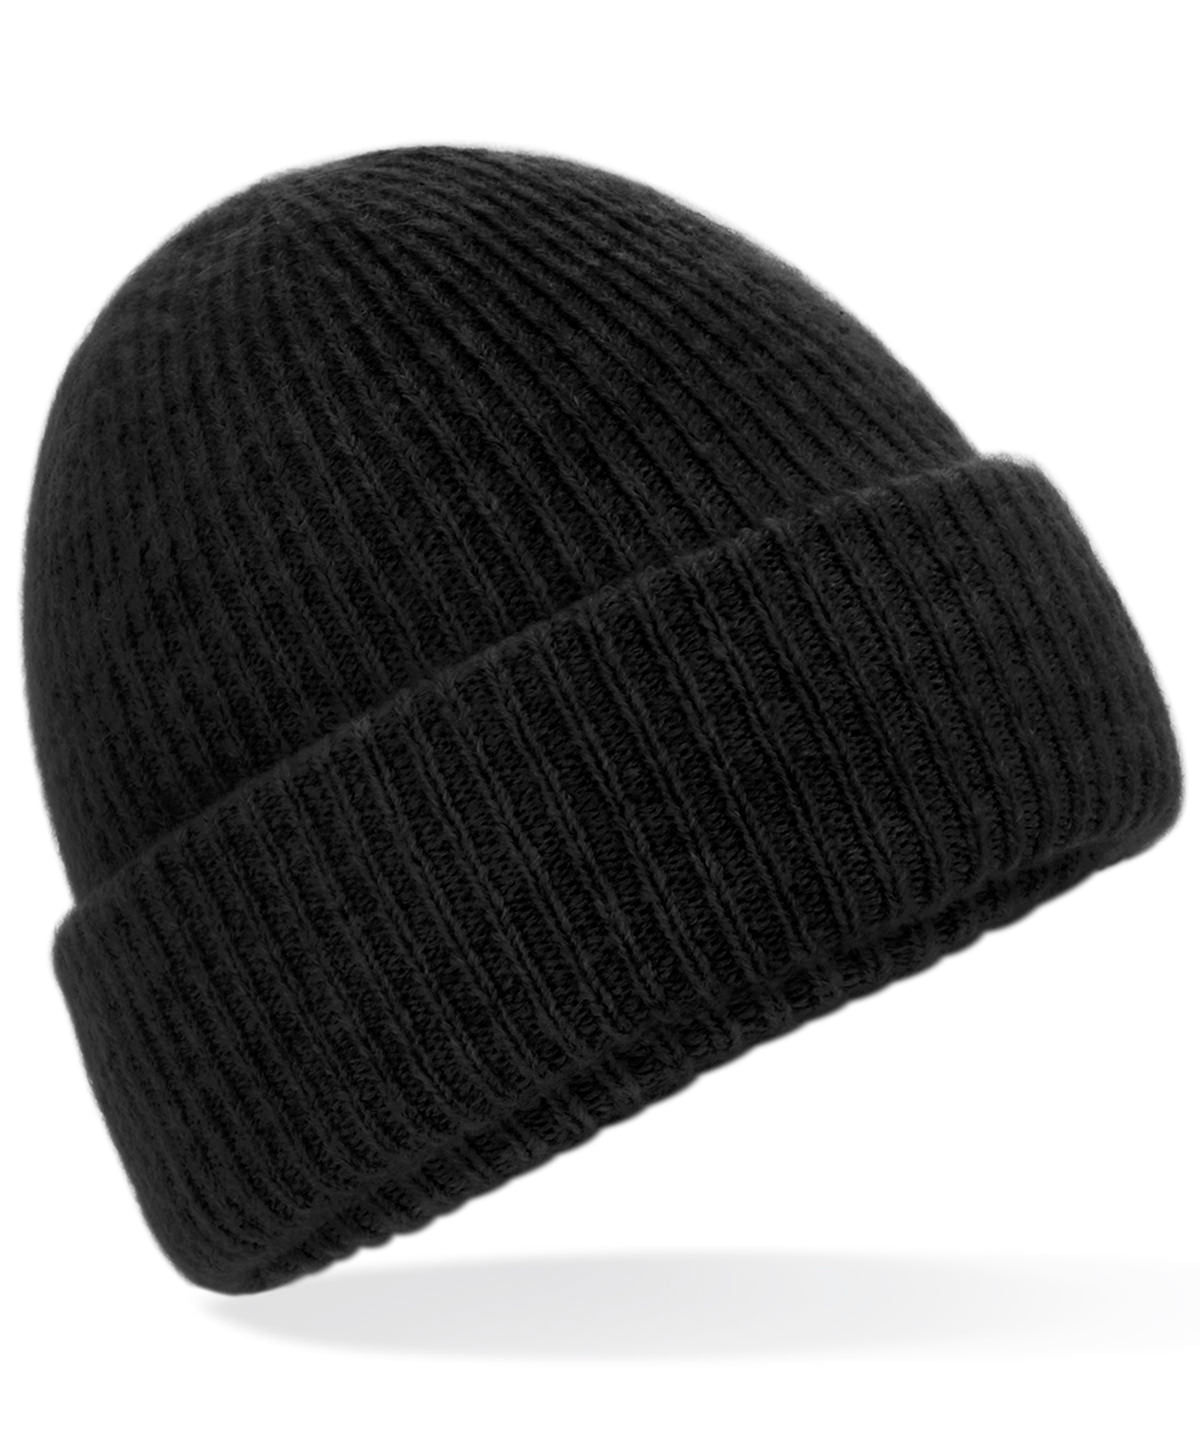 Personalised Hats - Black Beechfield Cosy ribbed beanie